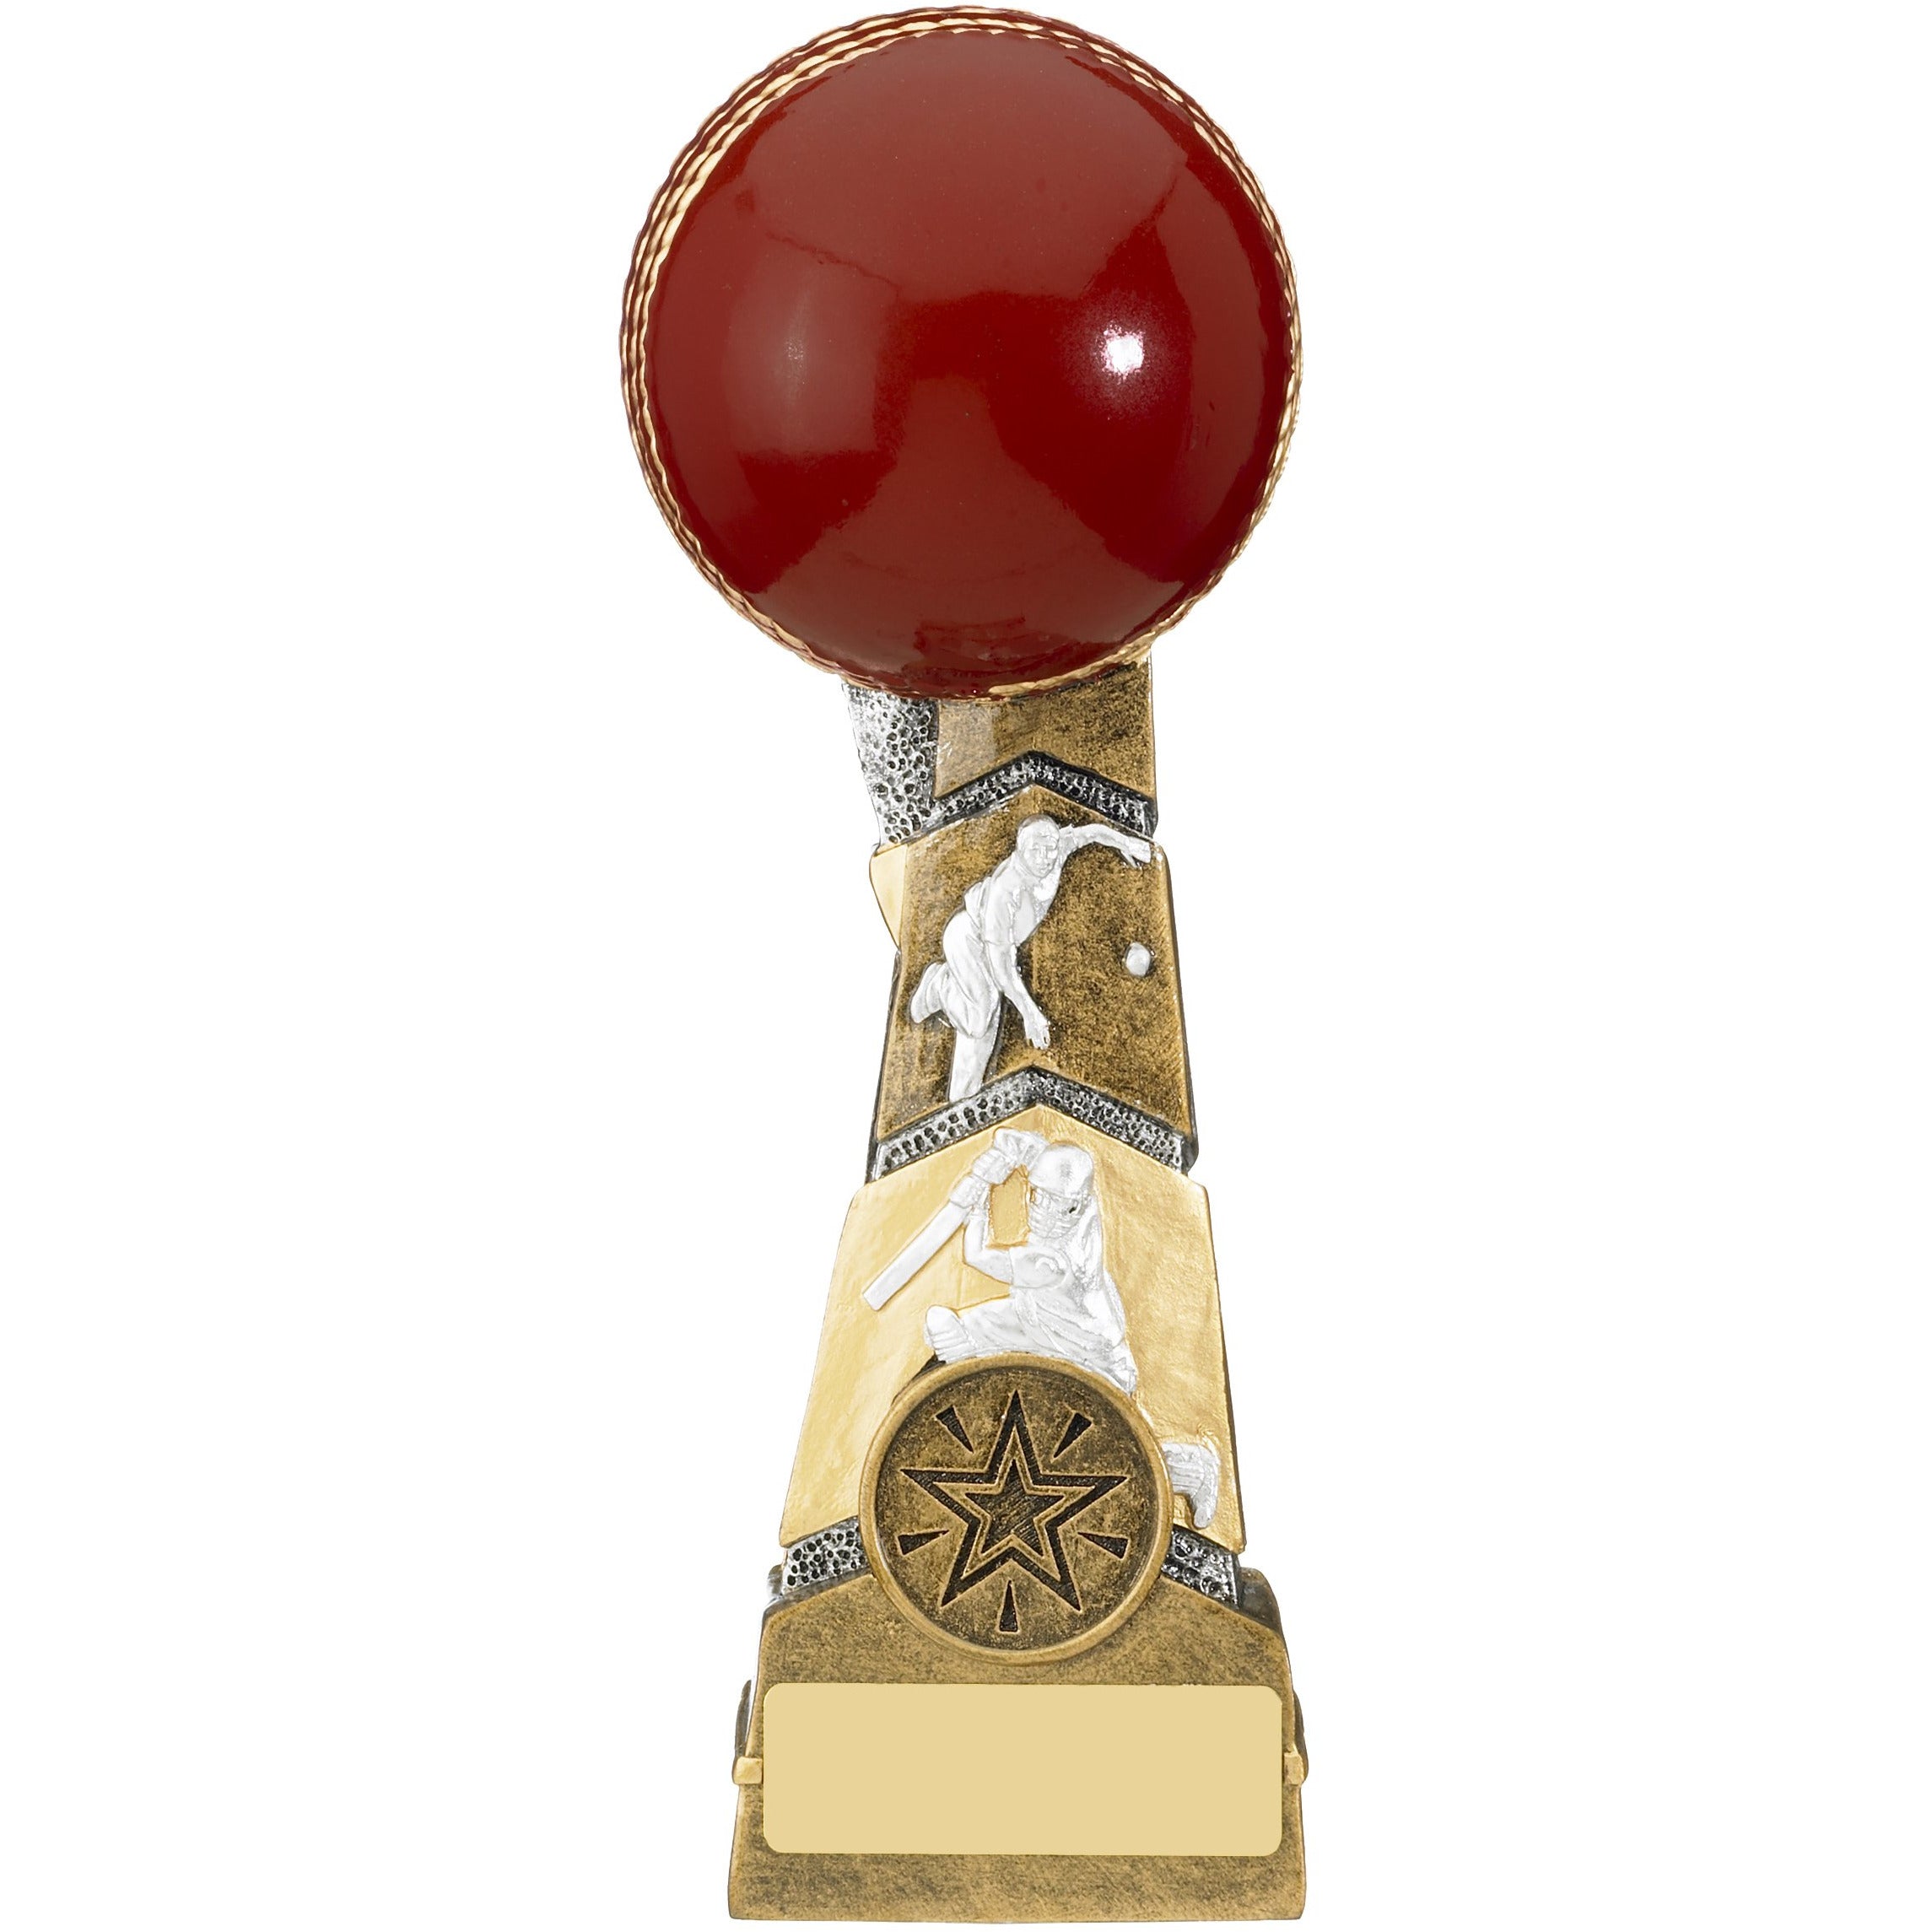 Forza Cricket Ball Statue Trophy